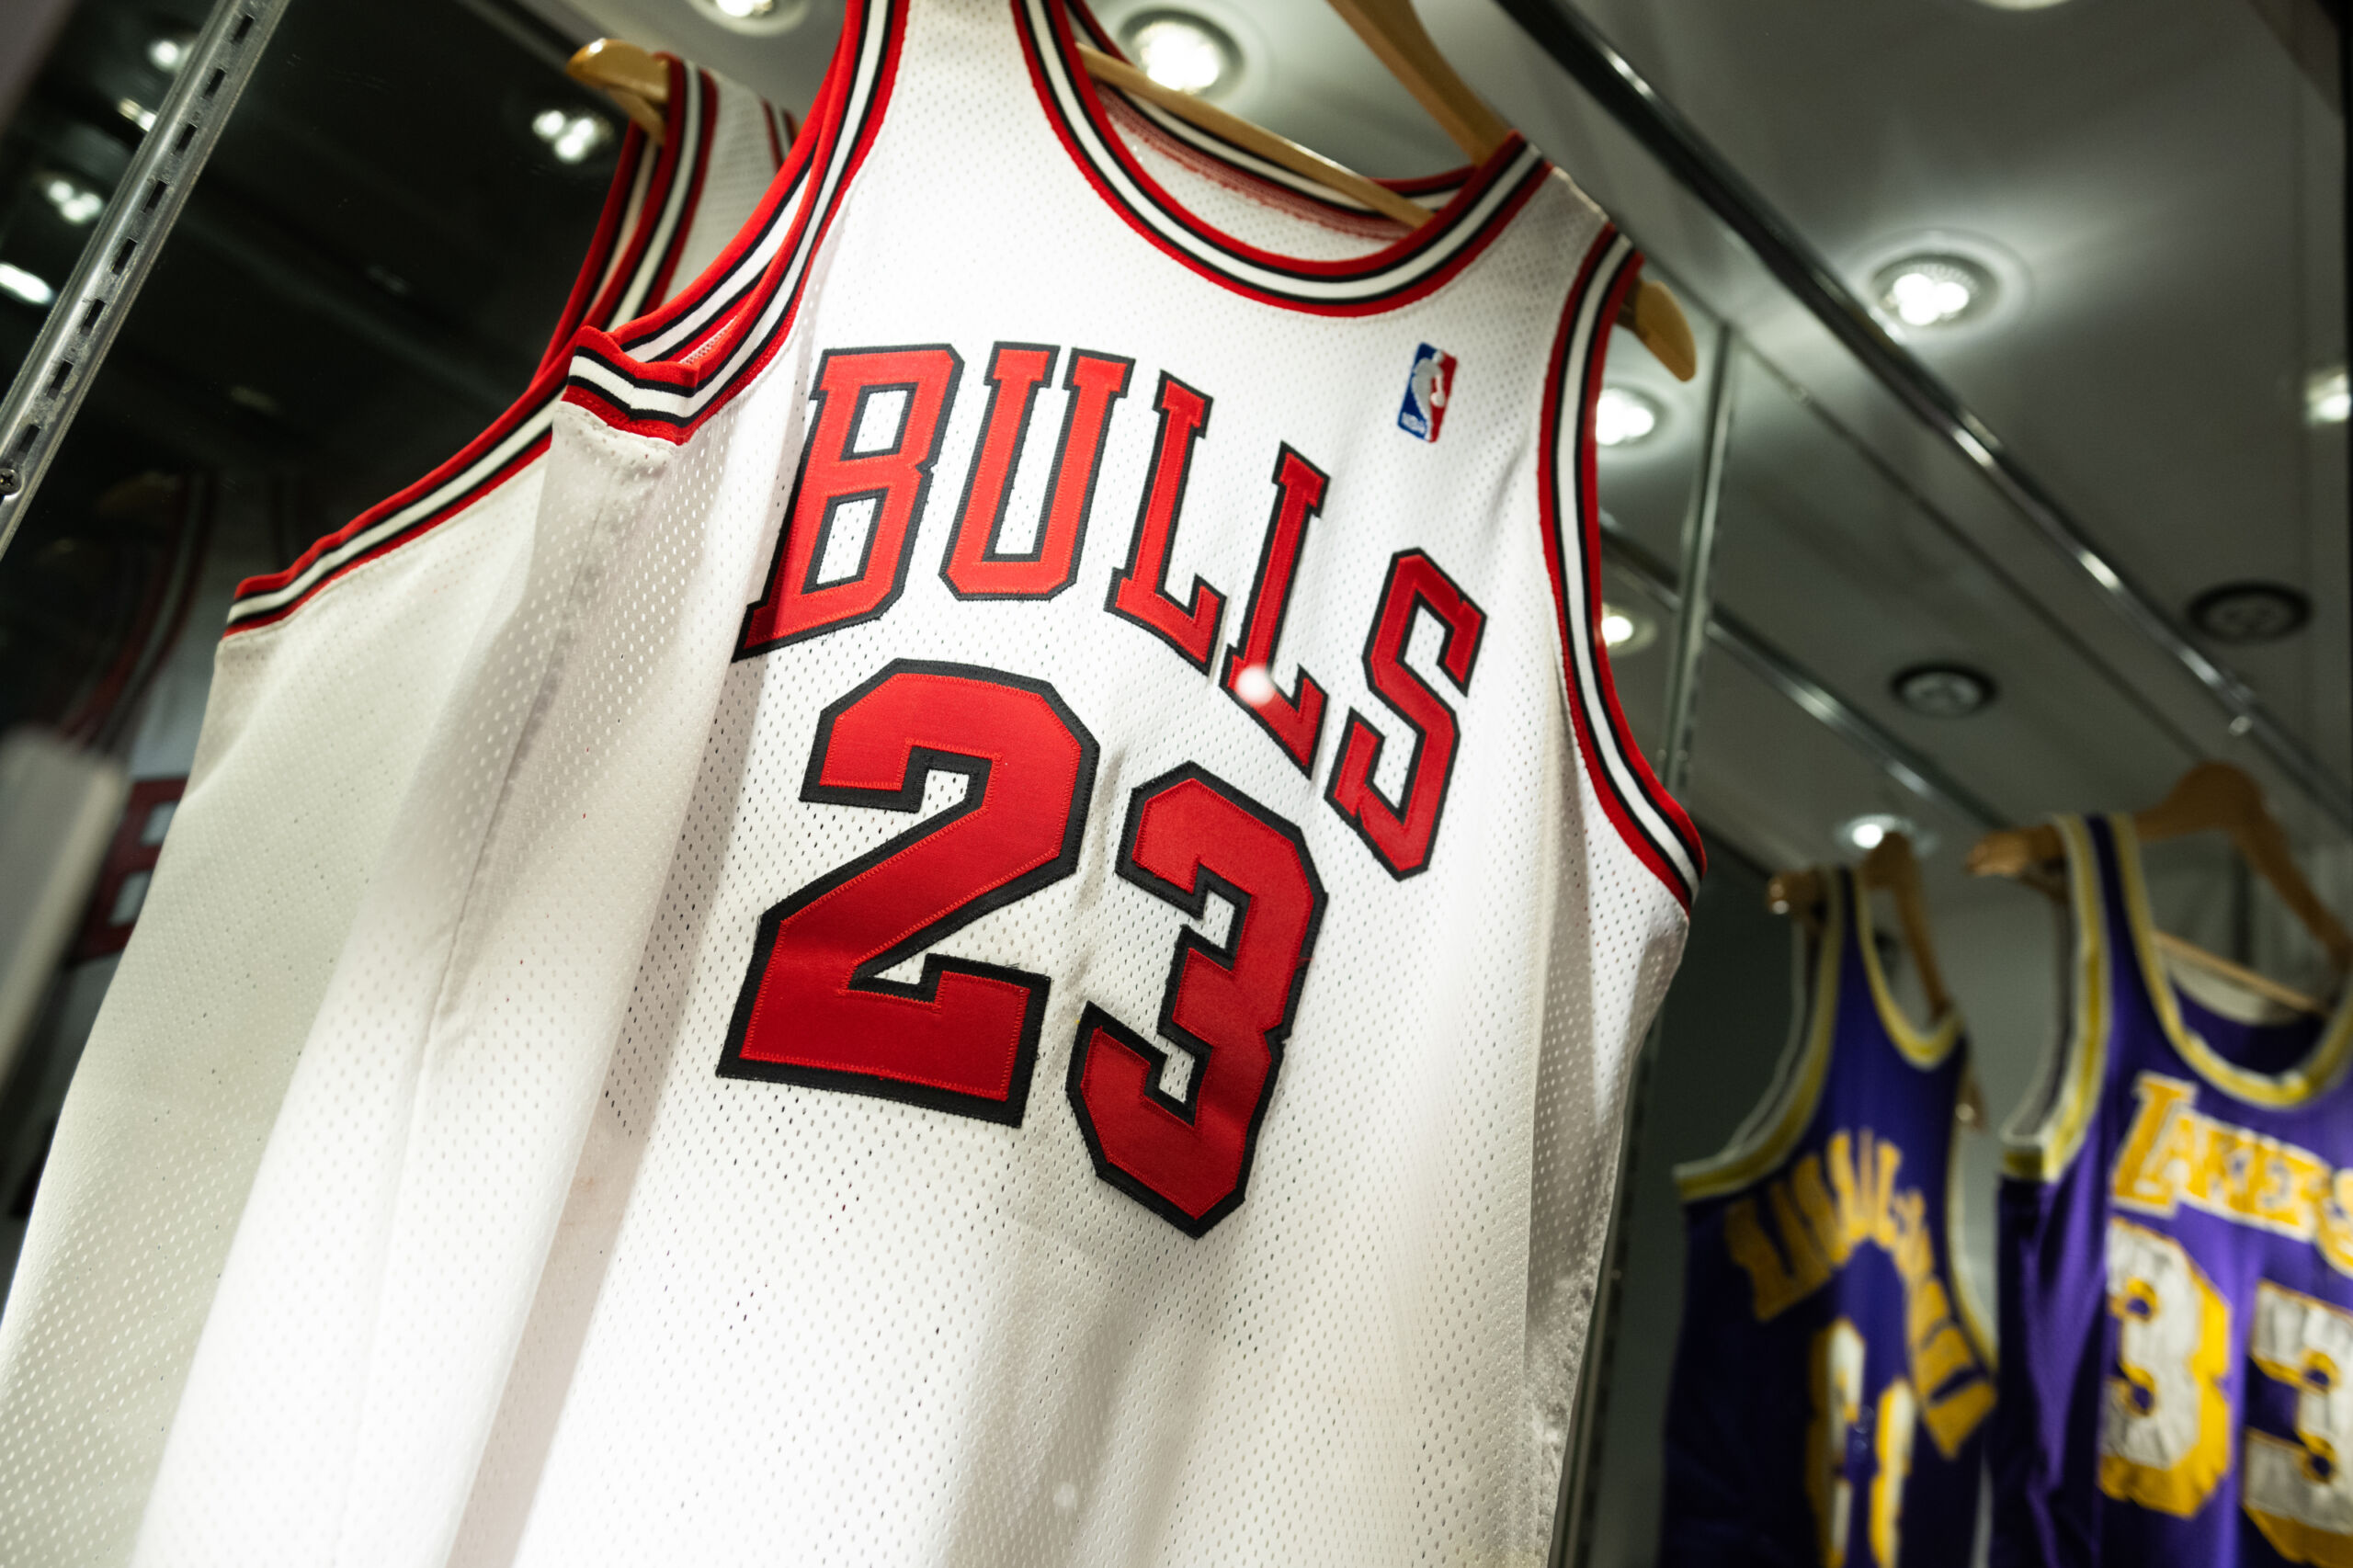 Chicago Bulls 22-23 City Edition Jersey Leaked